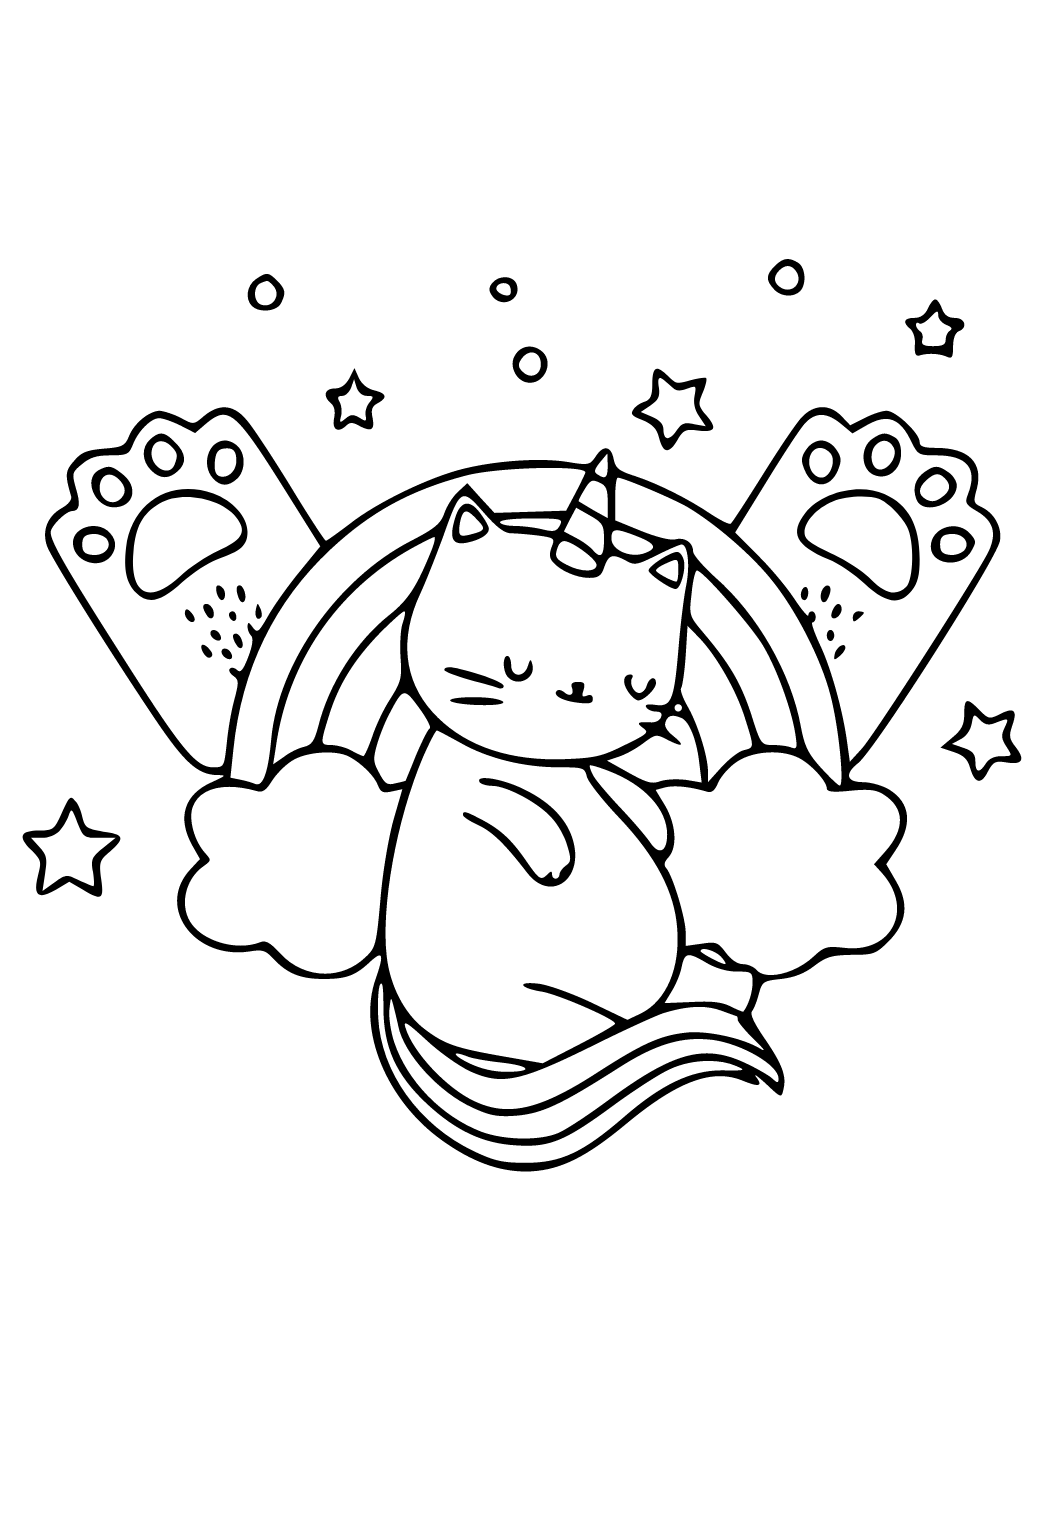 Free printable unicorn cat paws coloring page for adults and kids